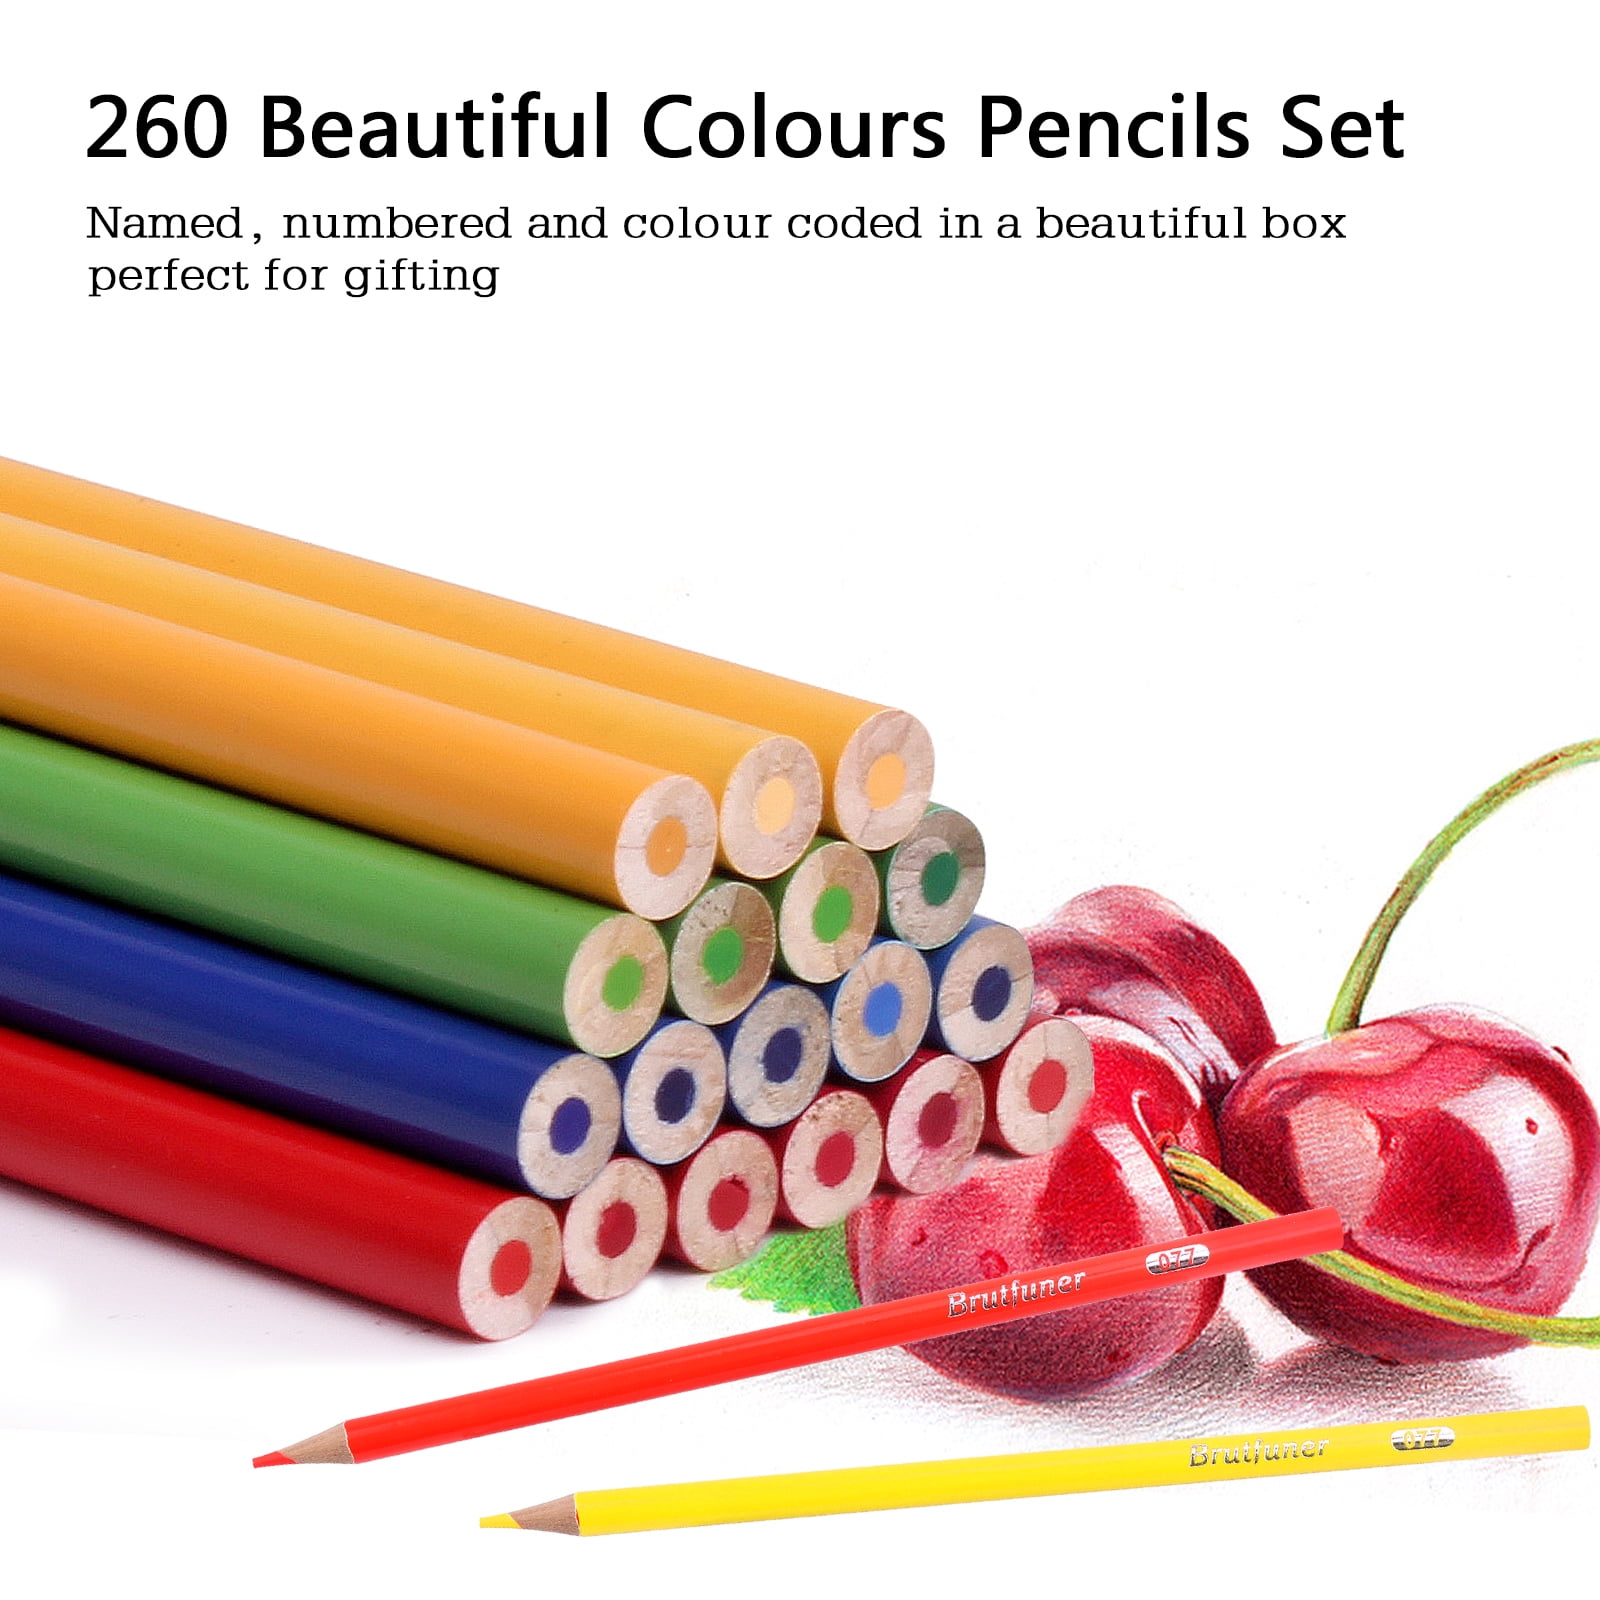  520 Coloring Pencils For Adults Coloring Books,Colored  Pencils Set For Artists Drawing,Sketching,Double 260 Drawing Pencils Art  Supplies Gift For Parents Kids Couple